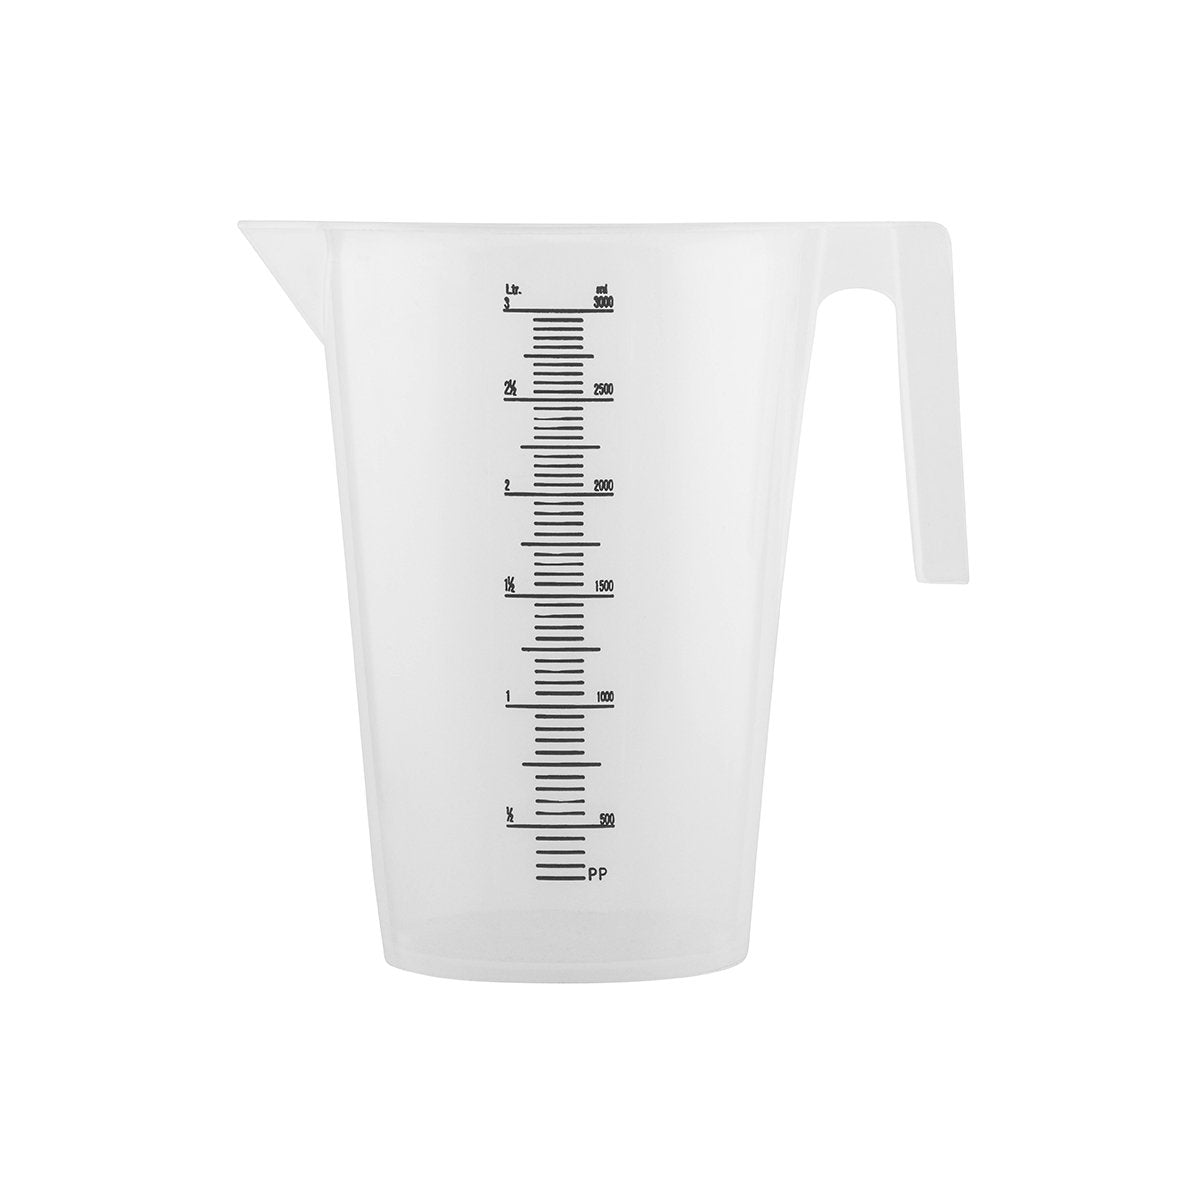 Measuring Jug - Graduated, Stackable, 3.0Lt from Trenton. stackable and sold in boxes of 1. Hospitality quality at wholesale price with The Flying Fork! 